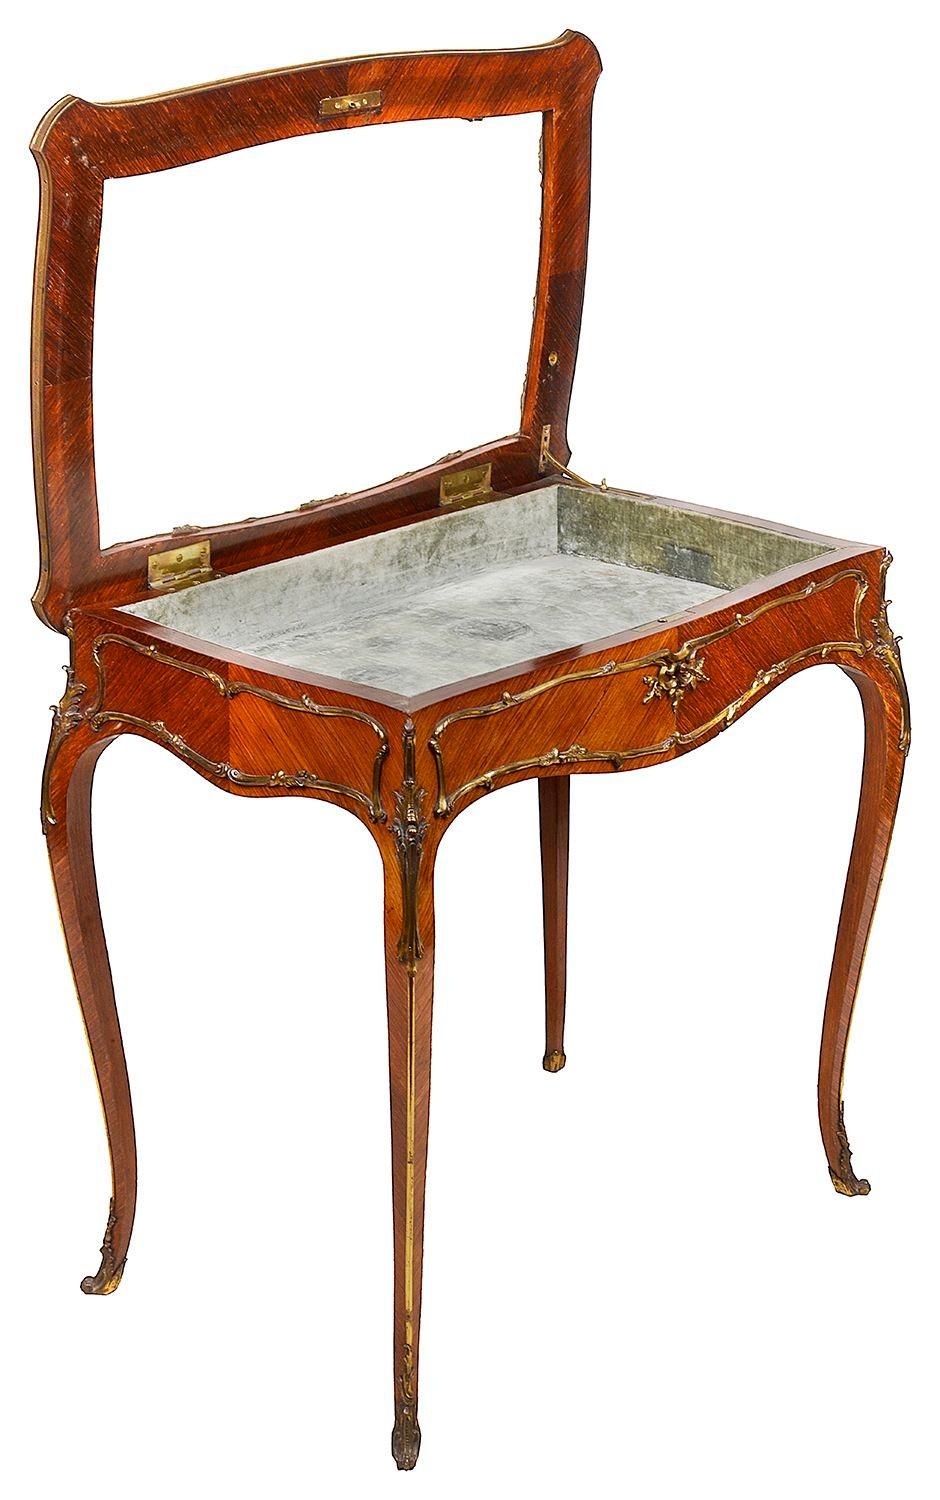 A French kingwood and ormolu-mounted bijouterie table, the shaped top with decorative ormolu moulding and shaped moulding framing the lid, the apron is shaped and framed by decorative ormolu mounts, the cabriole legs with decorative ormolu mounts